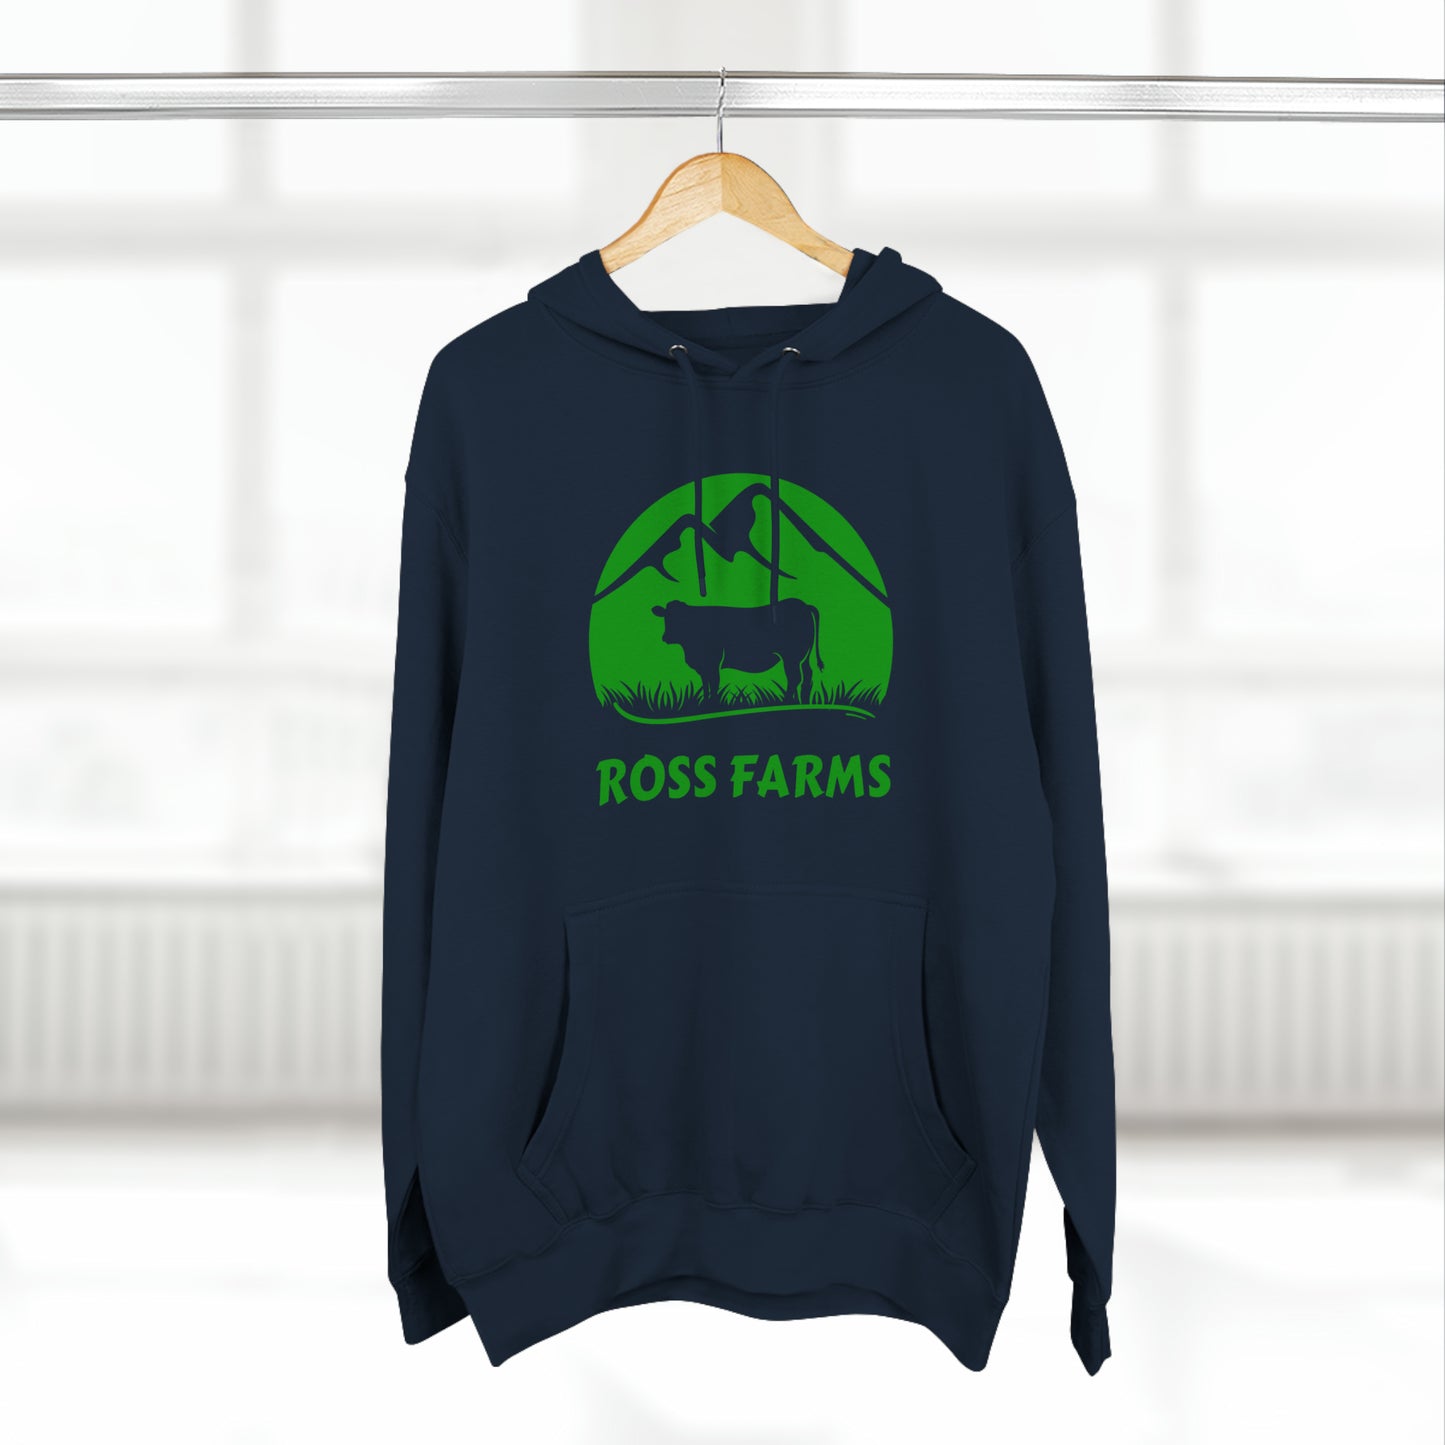 Custom "Cattle Farm" Hoodie - Weave Got Gifts - Unique Gifts You Won’t Find Anywhere Else!